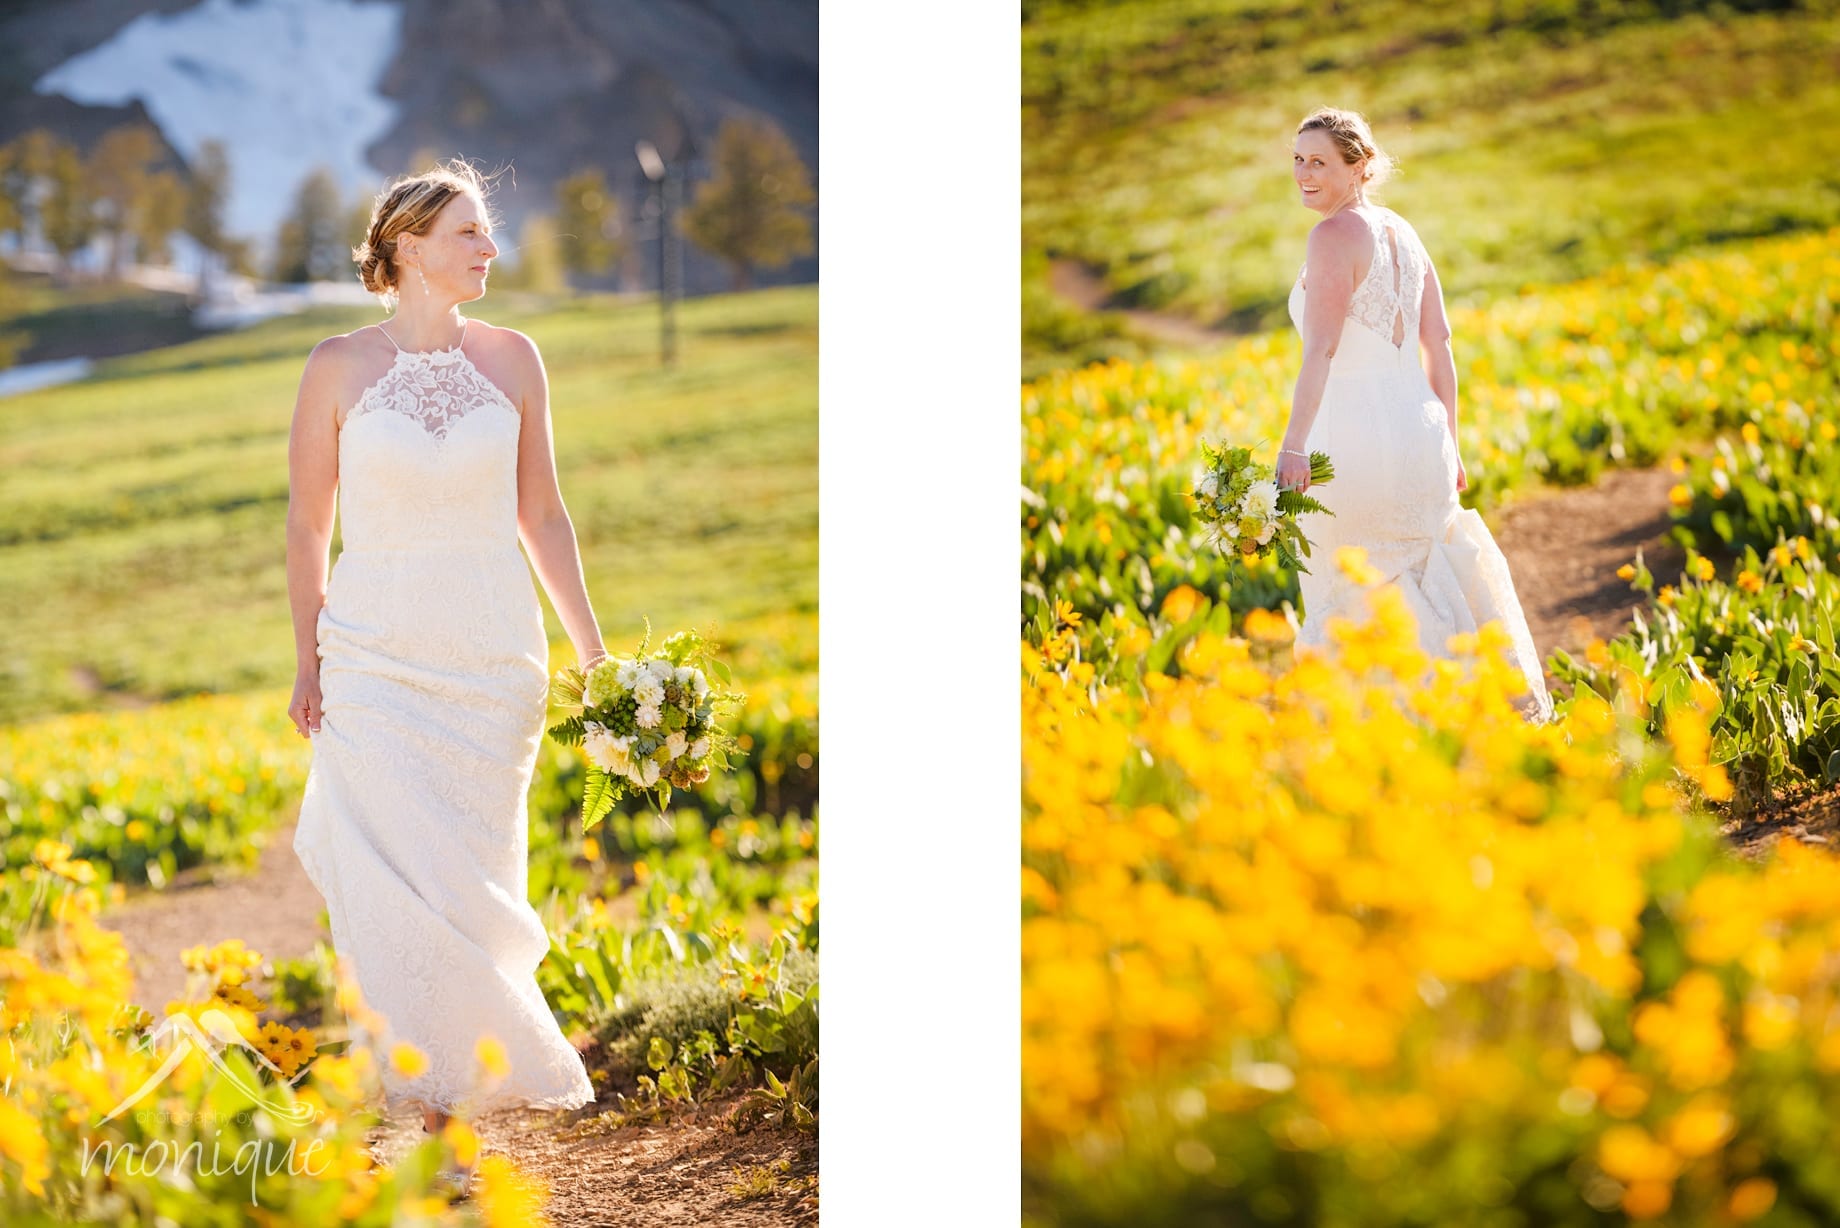 Squaw Valley High Camp wedding photography with the bride walking through yellow wild flowers